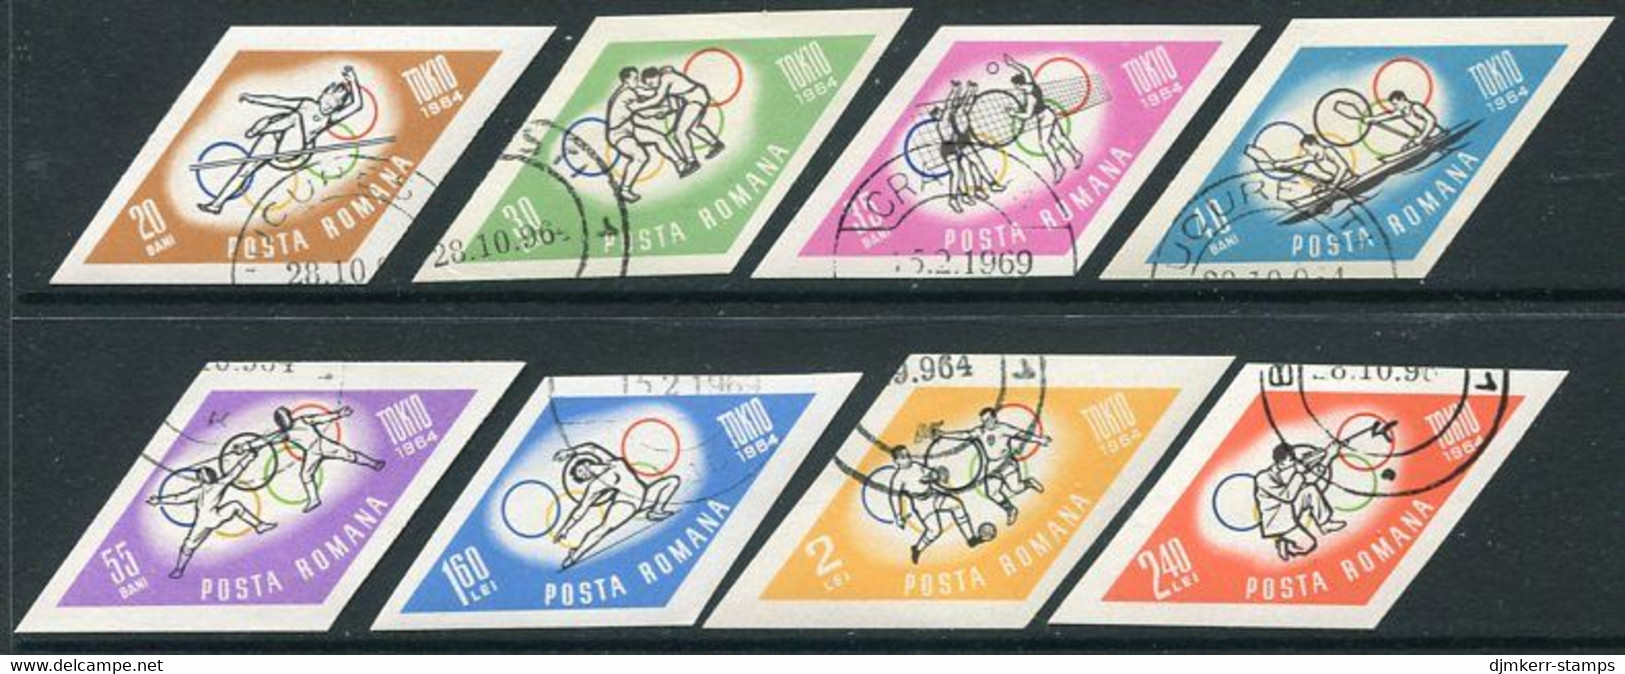 ROMANIA 1964 Tokyo Olympic Games Imperforate Used.  Michel 2317-24 - Gebraucht